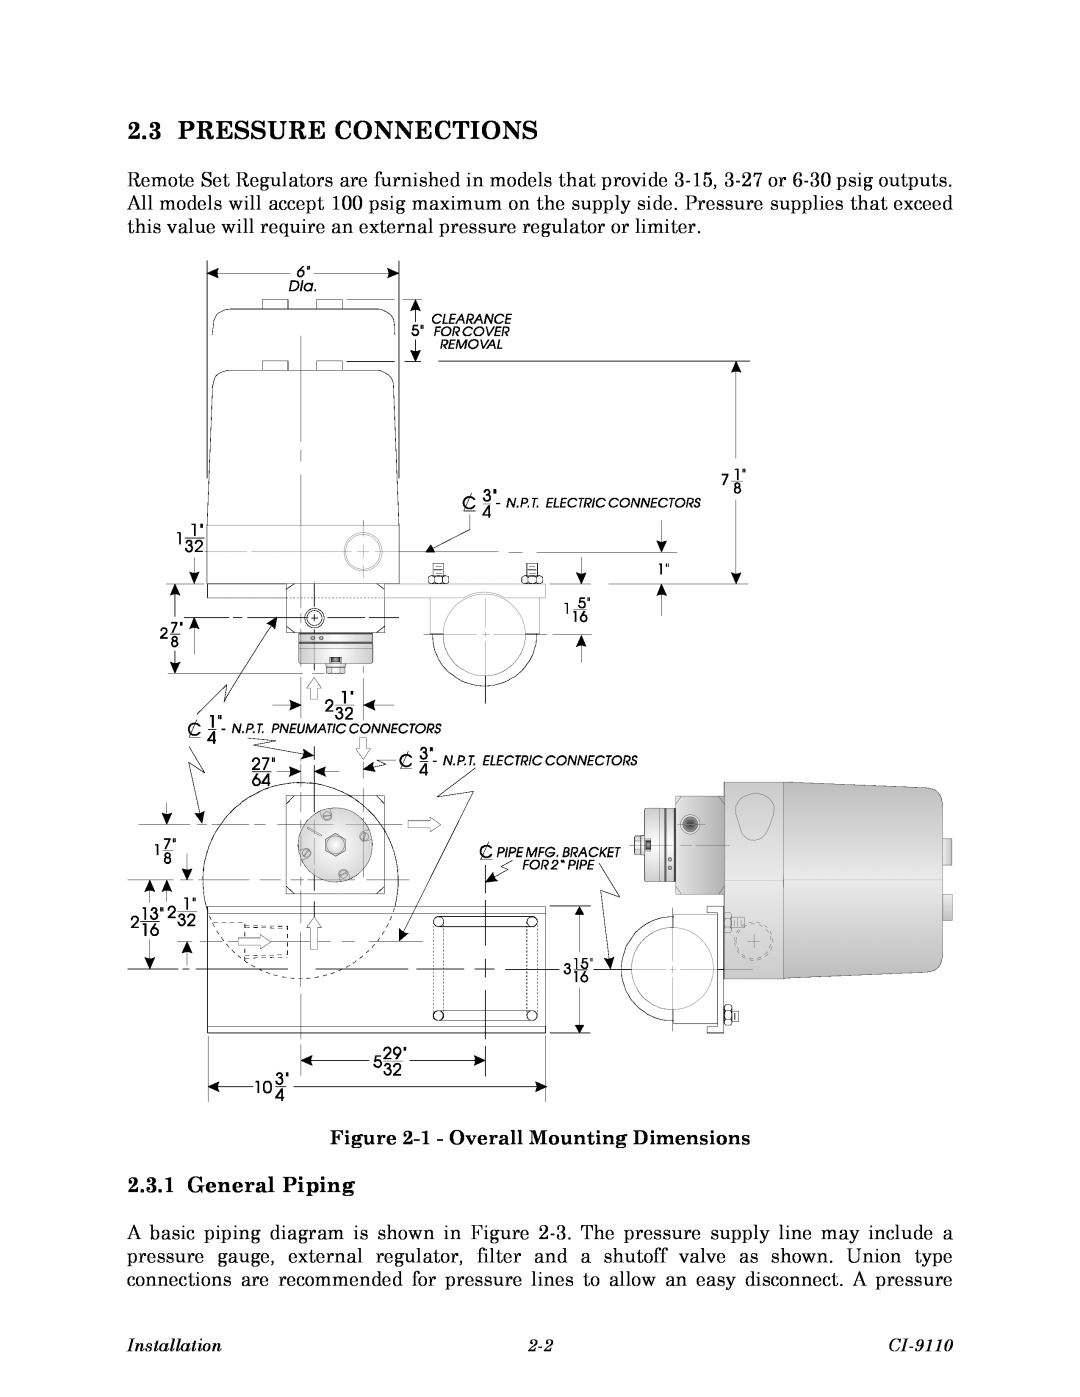 Emerson Process Management 9110-00A, Series 9110 Pressure Connections, General Piping, 1 - Overall Mounting Dimensions 